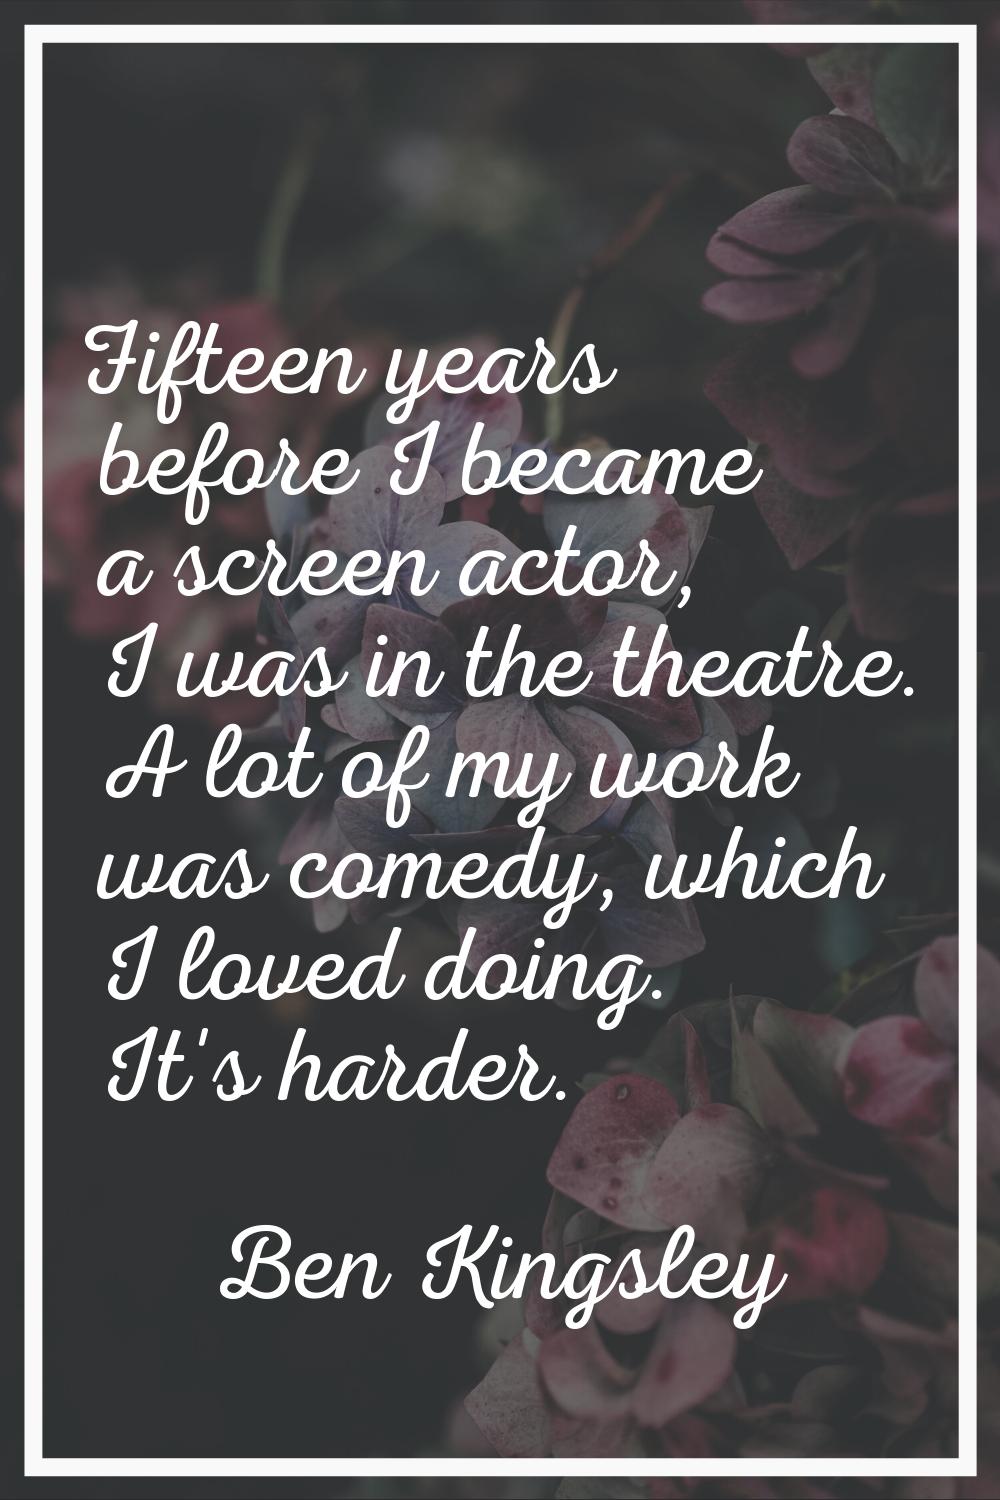 Fifteen years before I became a screen actor, I was in the theatre. A lot of my work was comedy, wh